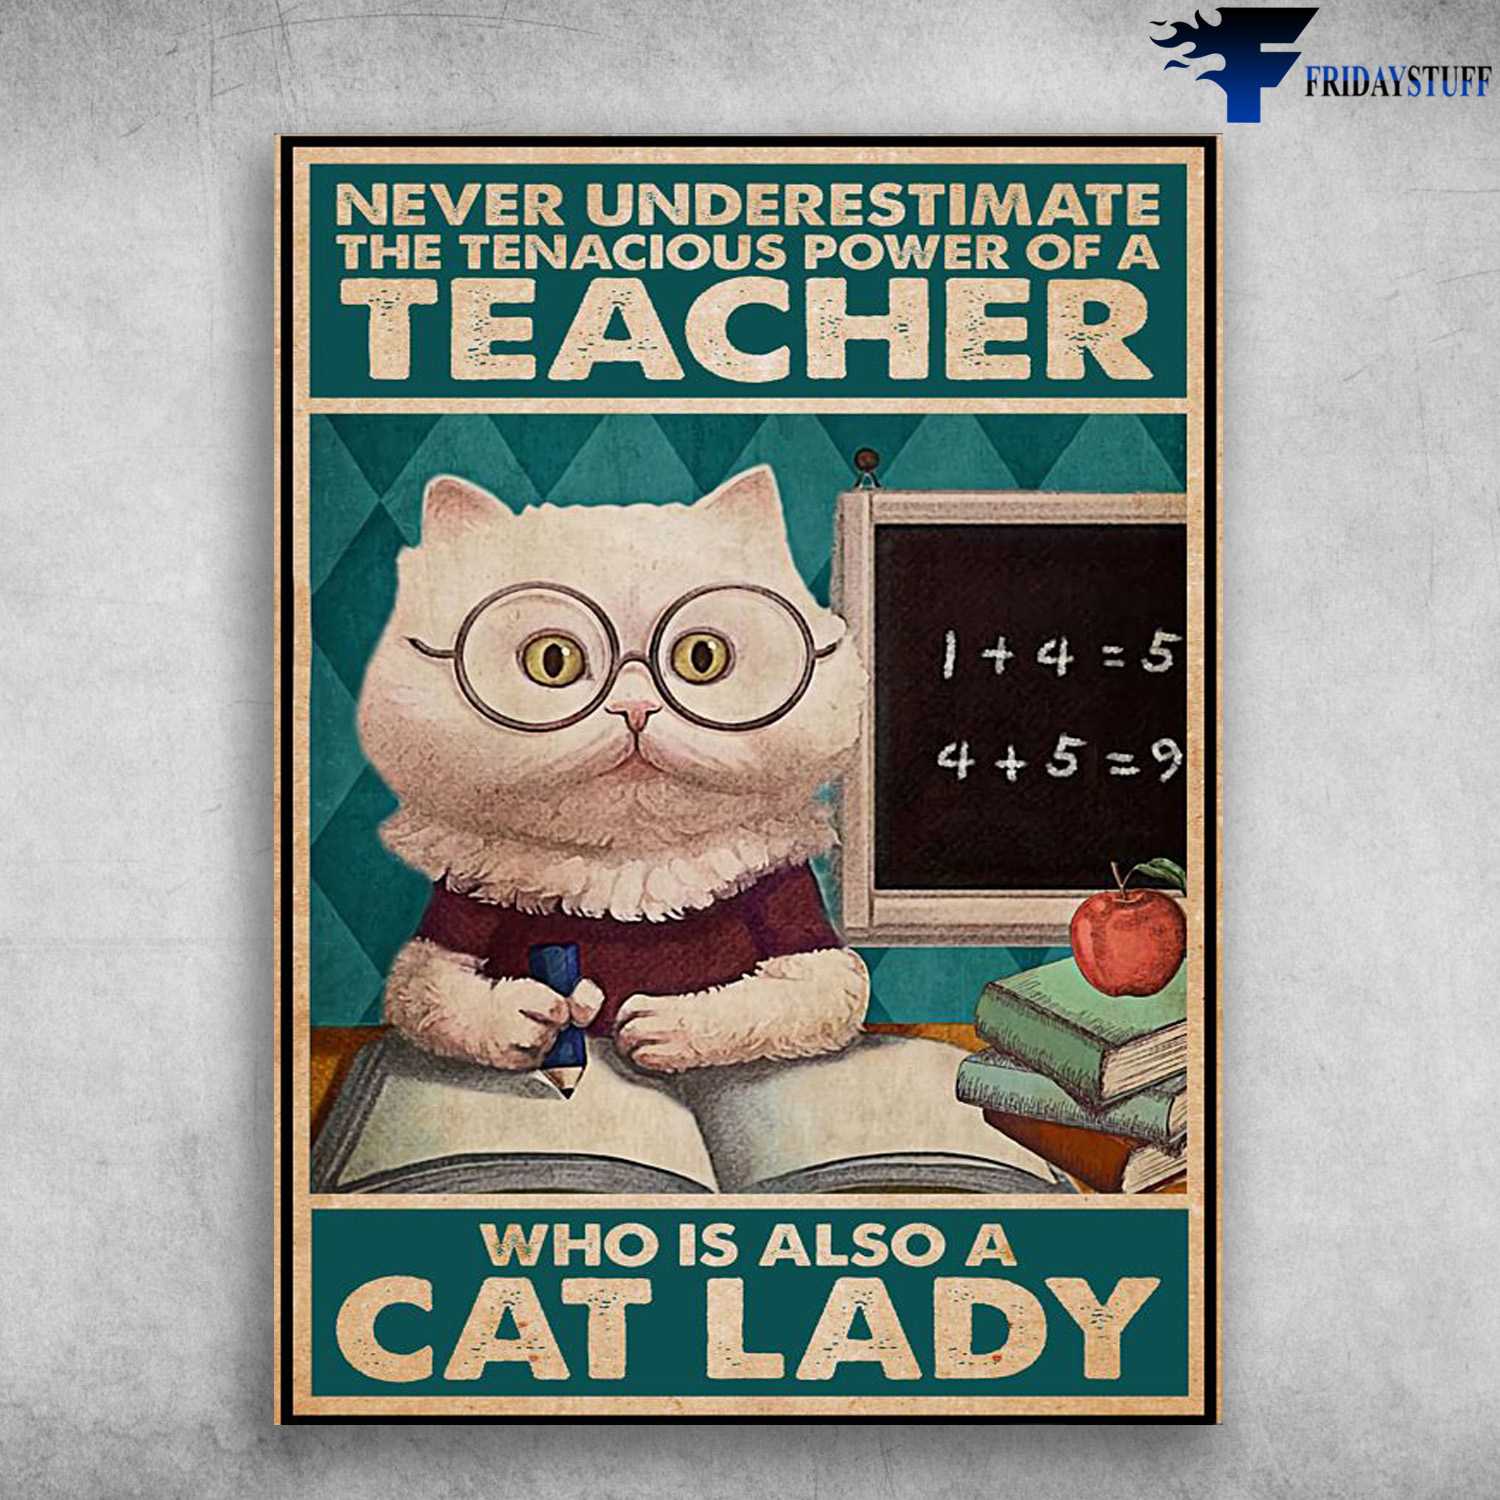 Gift For Teacher, Cat Lover, Never Underestimate, The Tenacious Power Of A Teacher, Who Is Also A Cat Lady